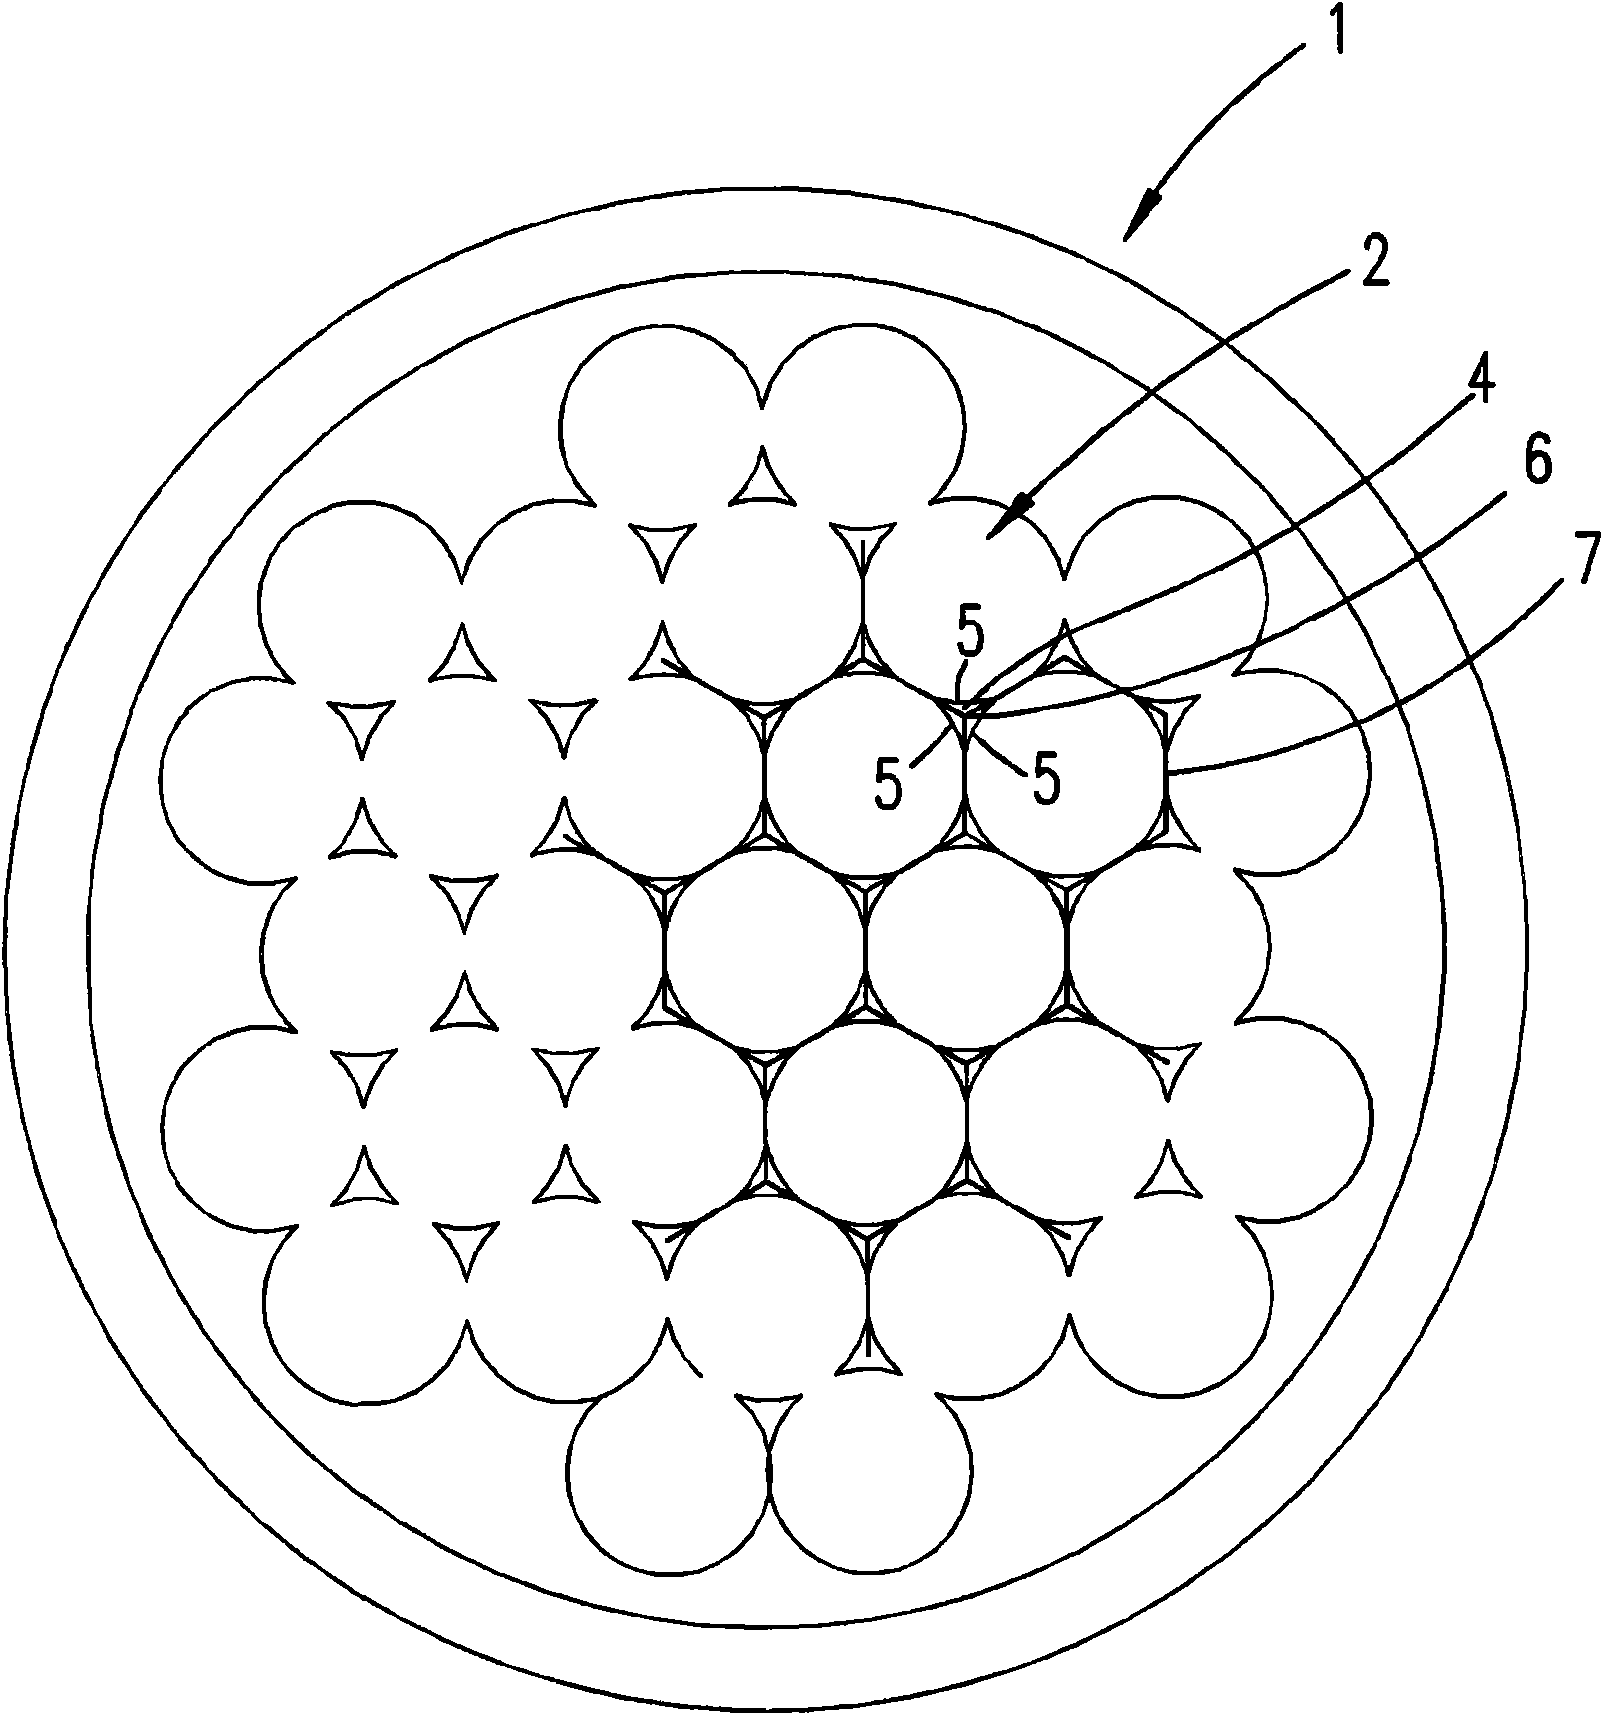 Device for coating a plurality of closest-packed substrates arranged on a susceptor